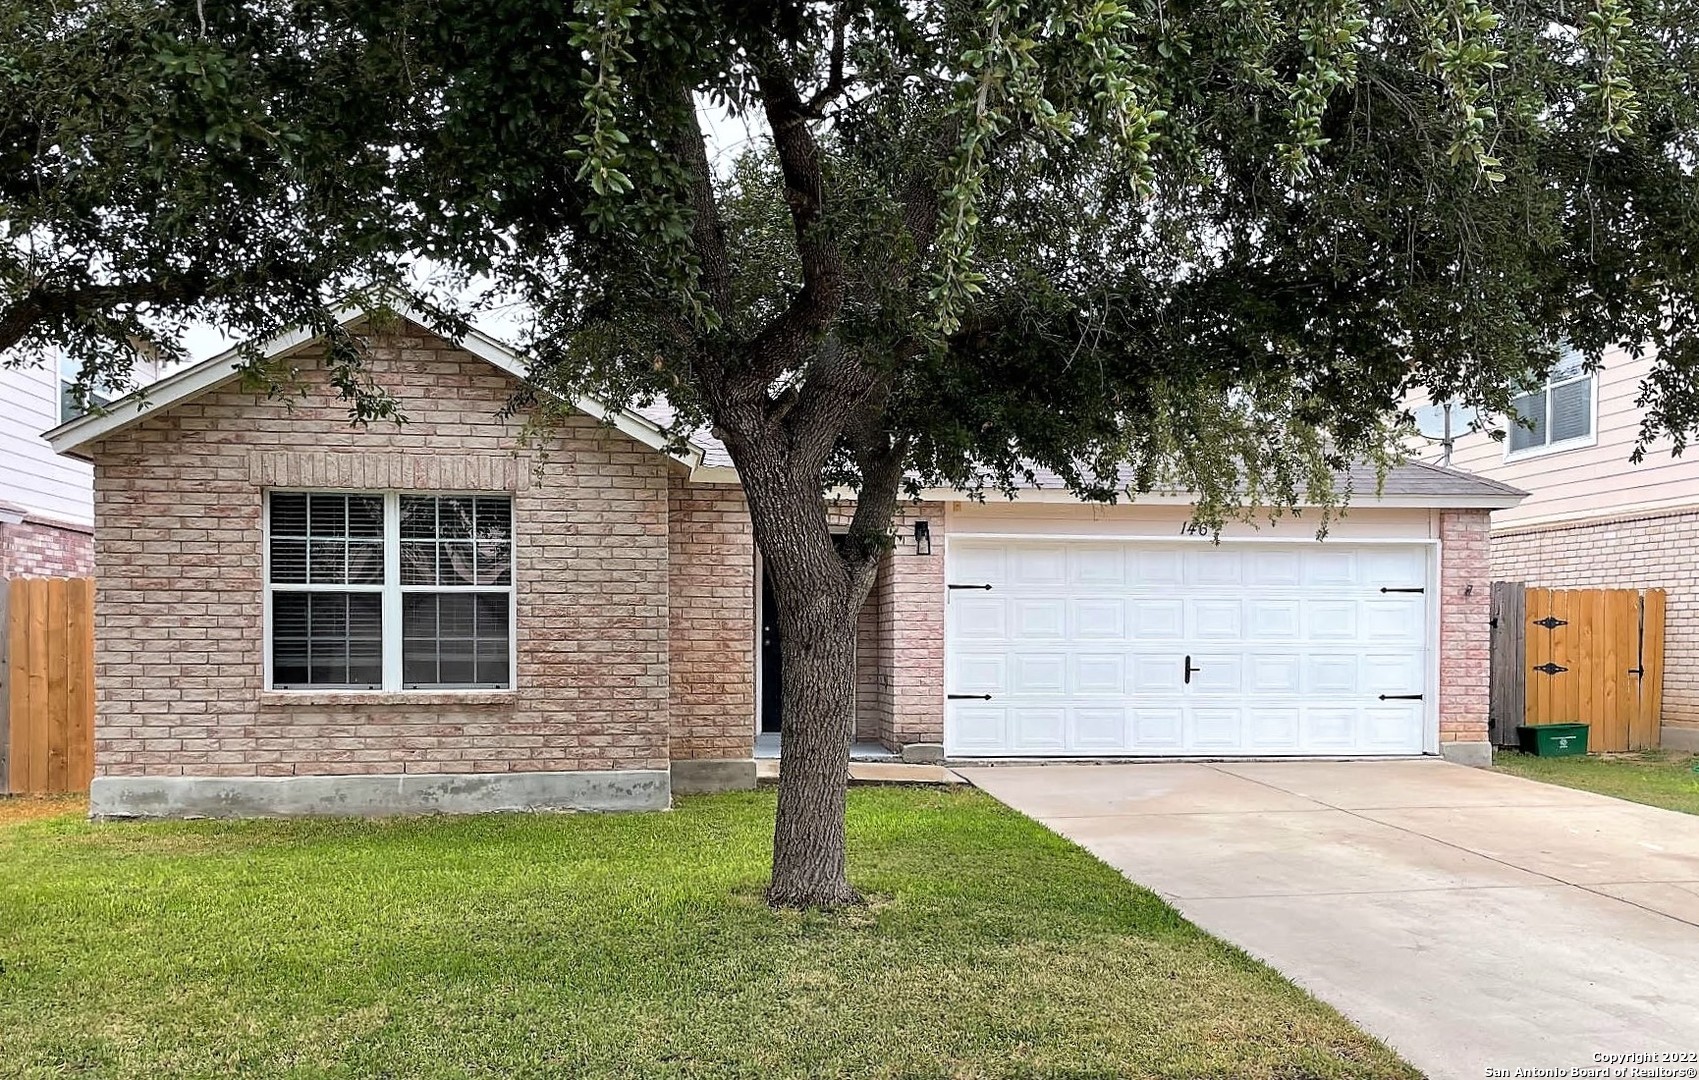 Beautiful Home, well cared for and updated with fresh paint, new kitchen sink, fans and hardware. Fabulous Location, in close proximity to great shopping, Schertz-Cibolo ISD schools, Randolph AFB and major highways. Open Floor plan with high ceilings, split Master bedroom from secondary bedrooms This 3/2/2 looks great, shows well and features many updates including fixtures, paint throughout, Ceiling fans, 2" blinds Separate tub & shower in master. Great One Story ready for its new owners!